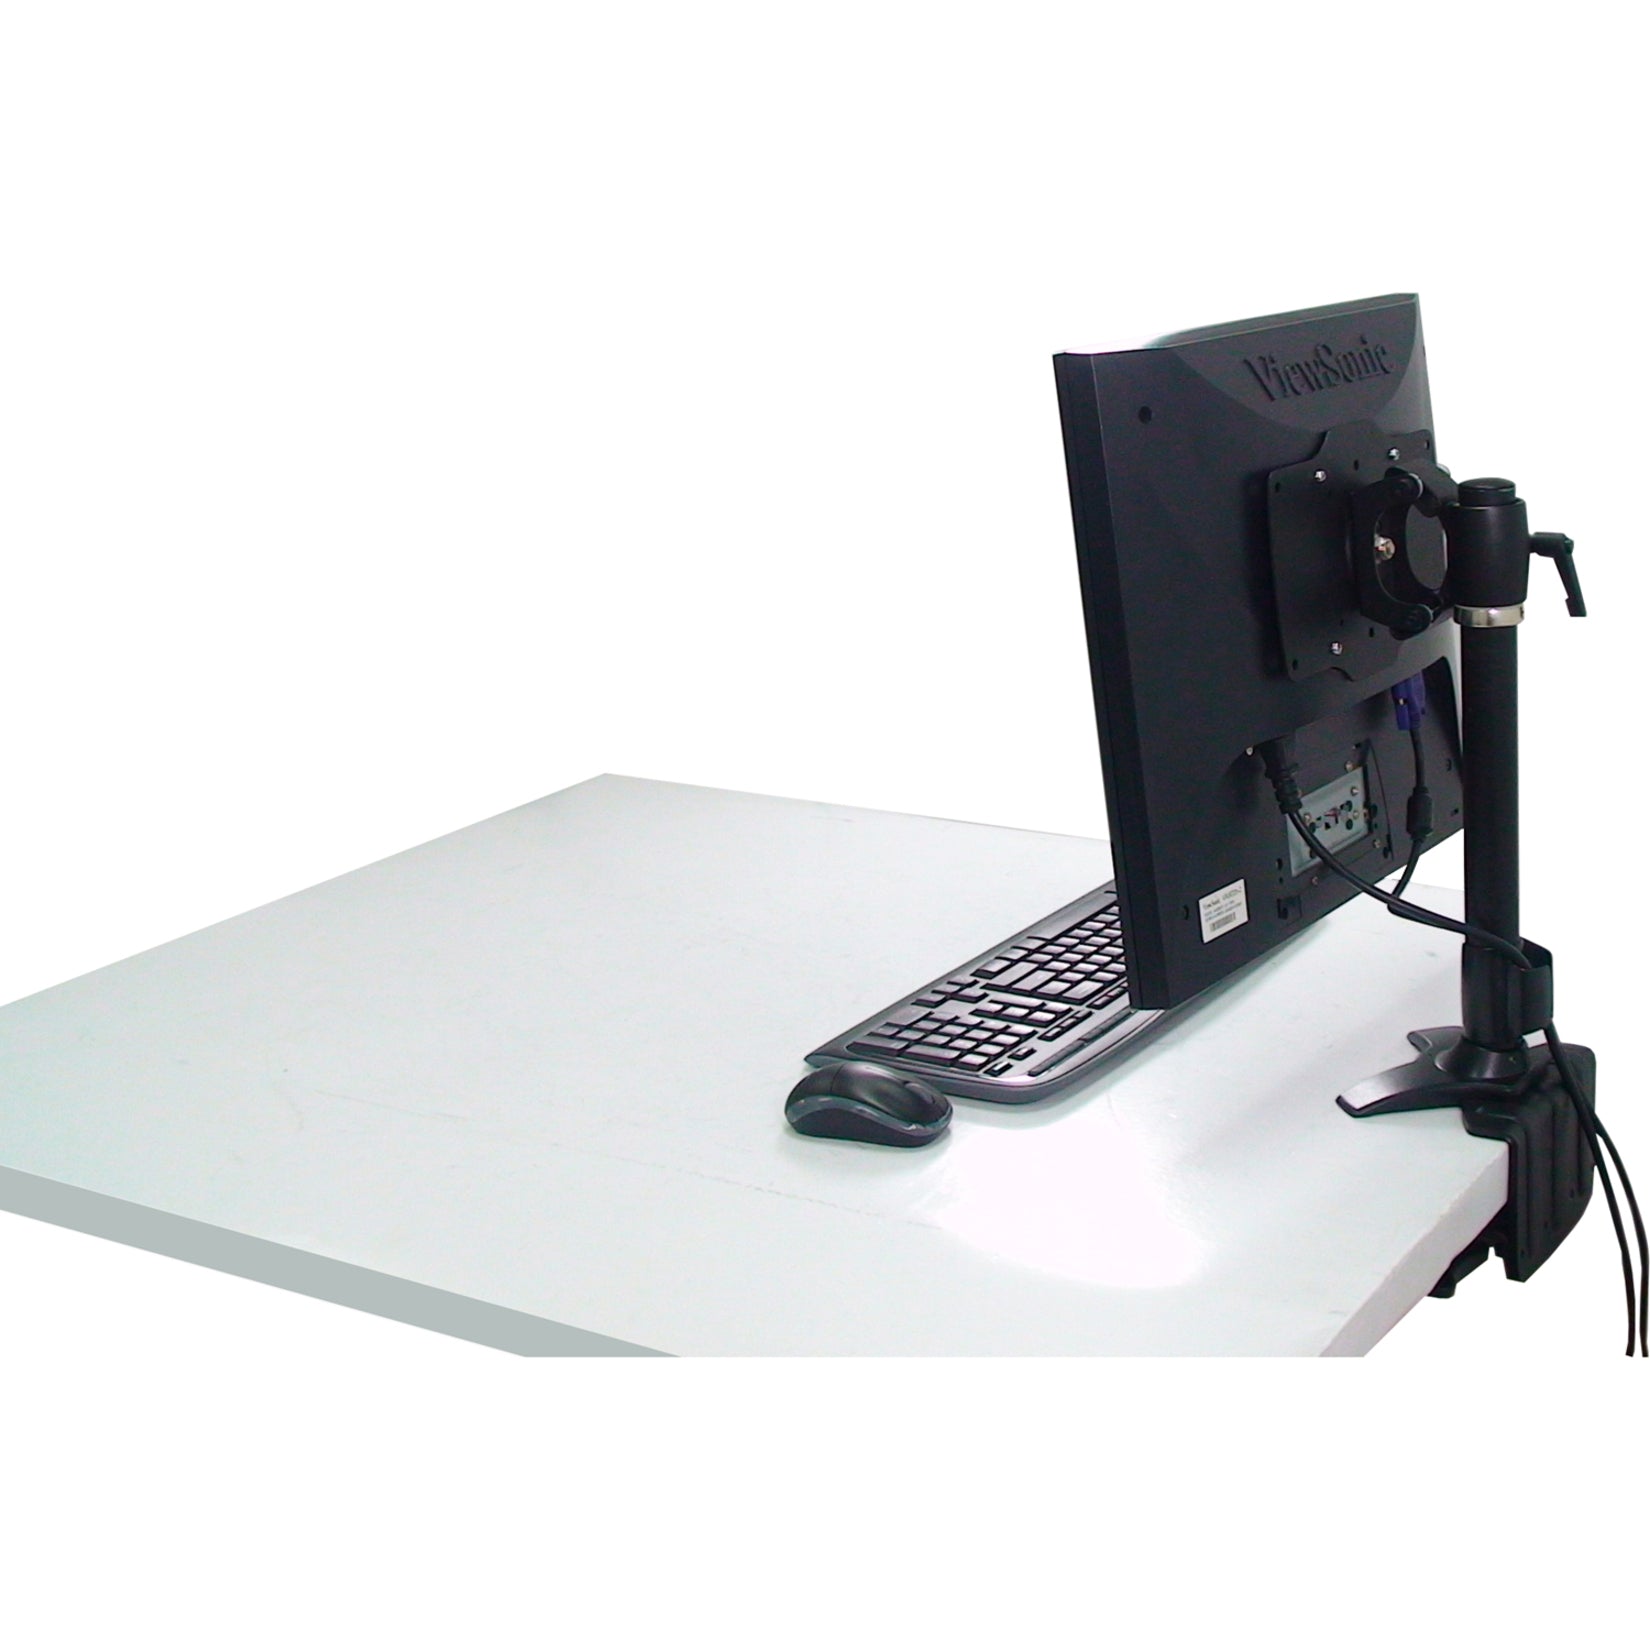 Amer AMR1C32 Clamp Mount for Monitor - TAA Compliant, Max 32" Screen Size, 33.07 lb Load Capacity